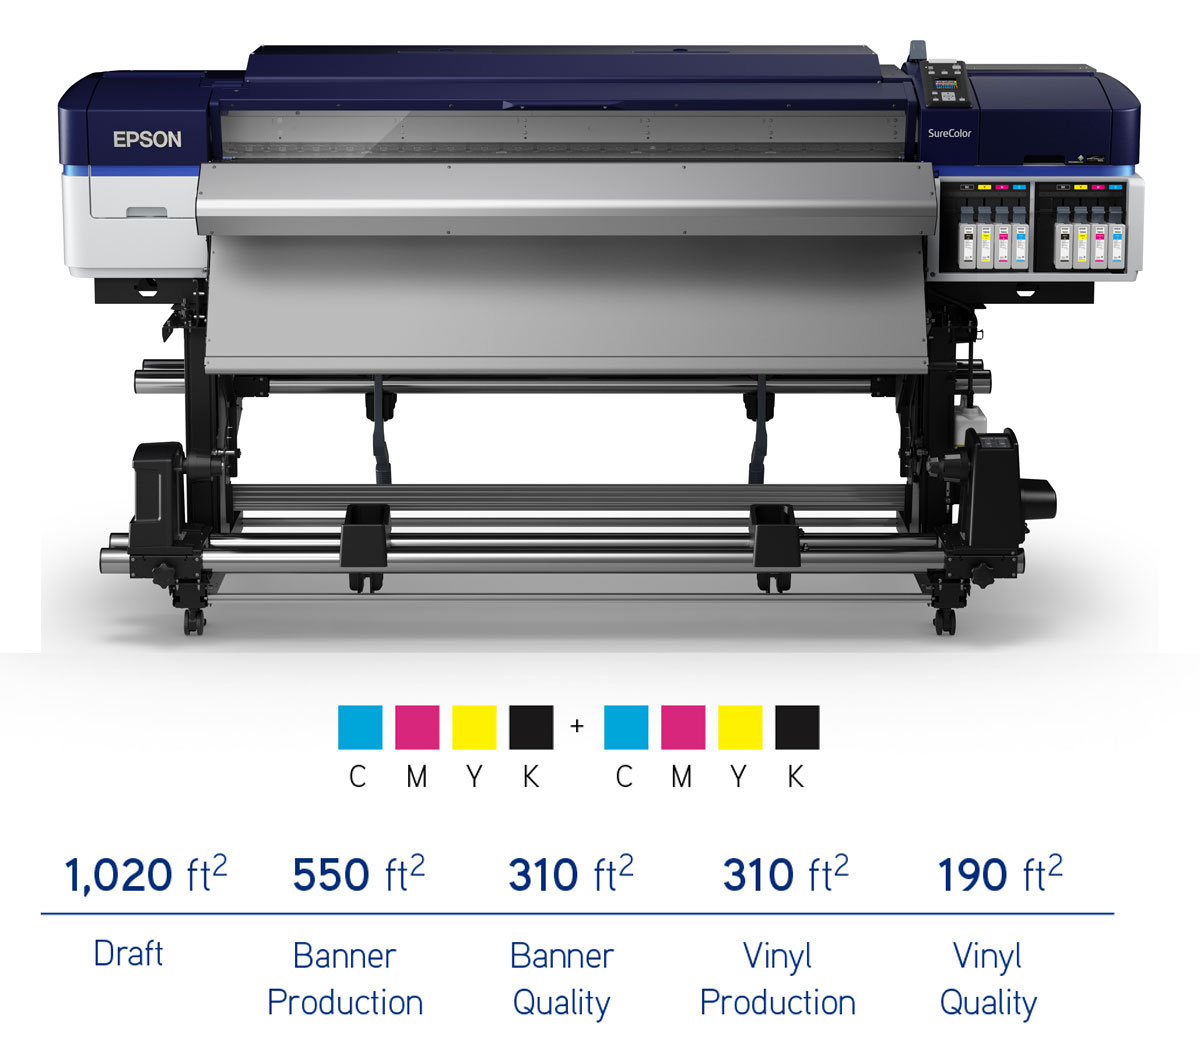 From there subtraction defeat Epson Surecolor S60600 Printer | 64" Large Format - Epson SureColor & HP  Printers - Dye Sub, DTG, Sign, Photo & Giclee